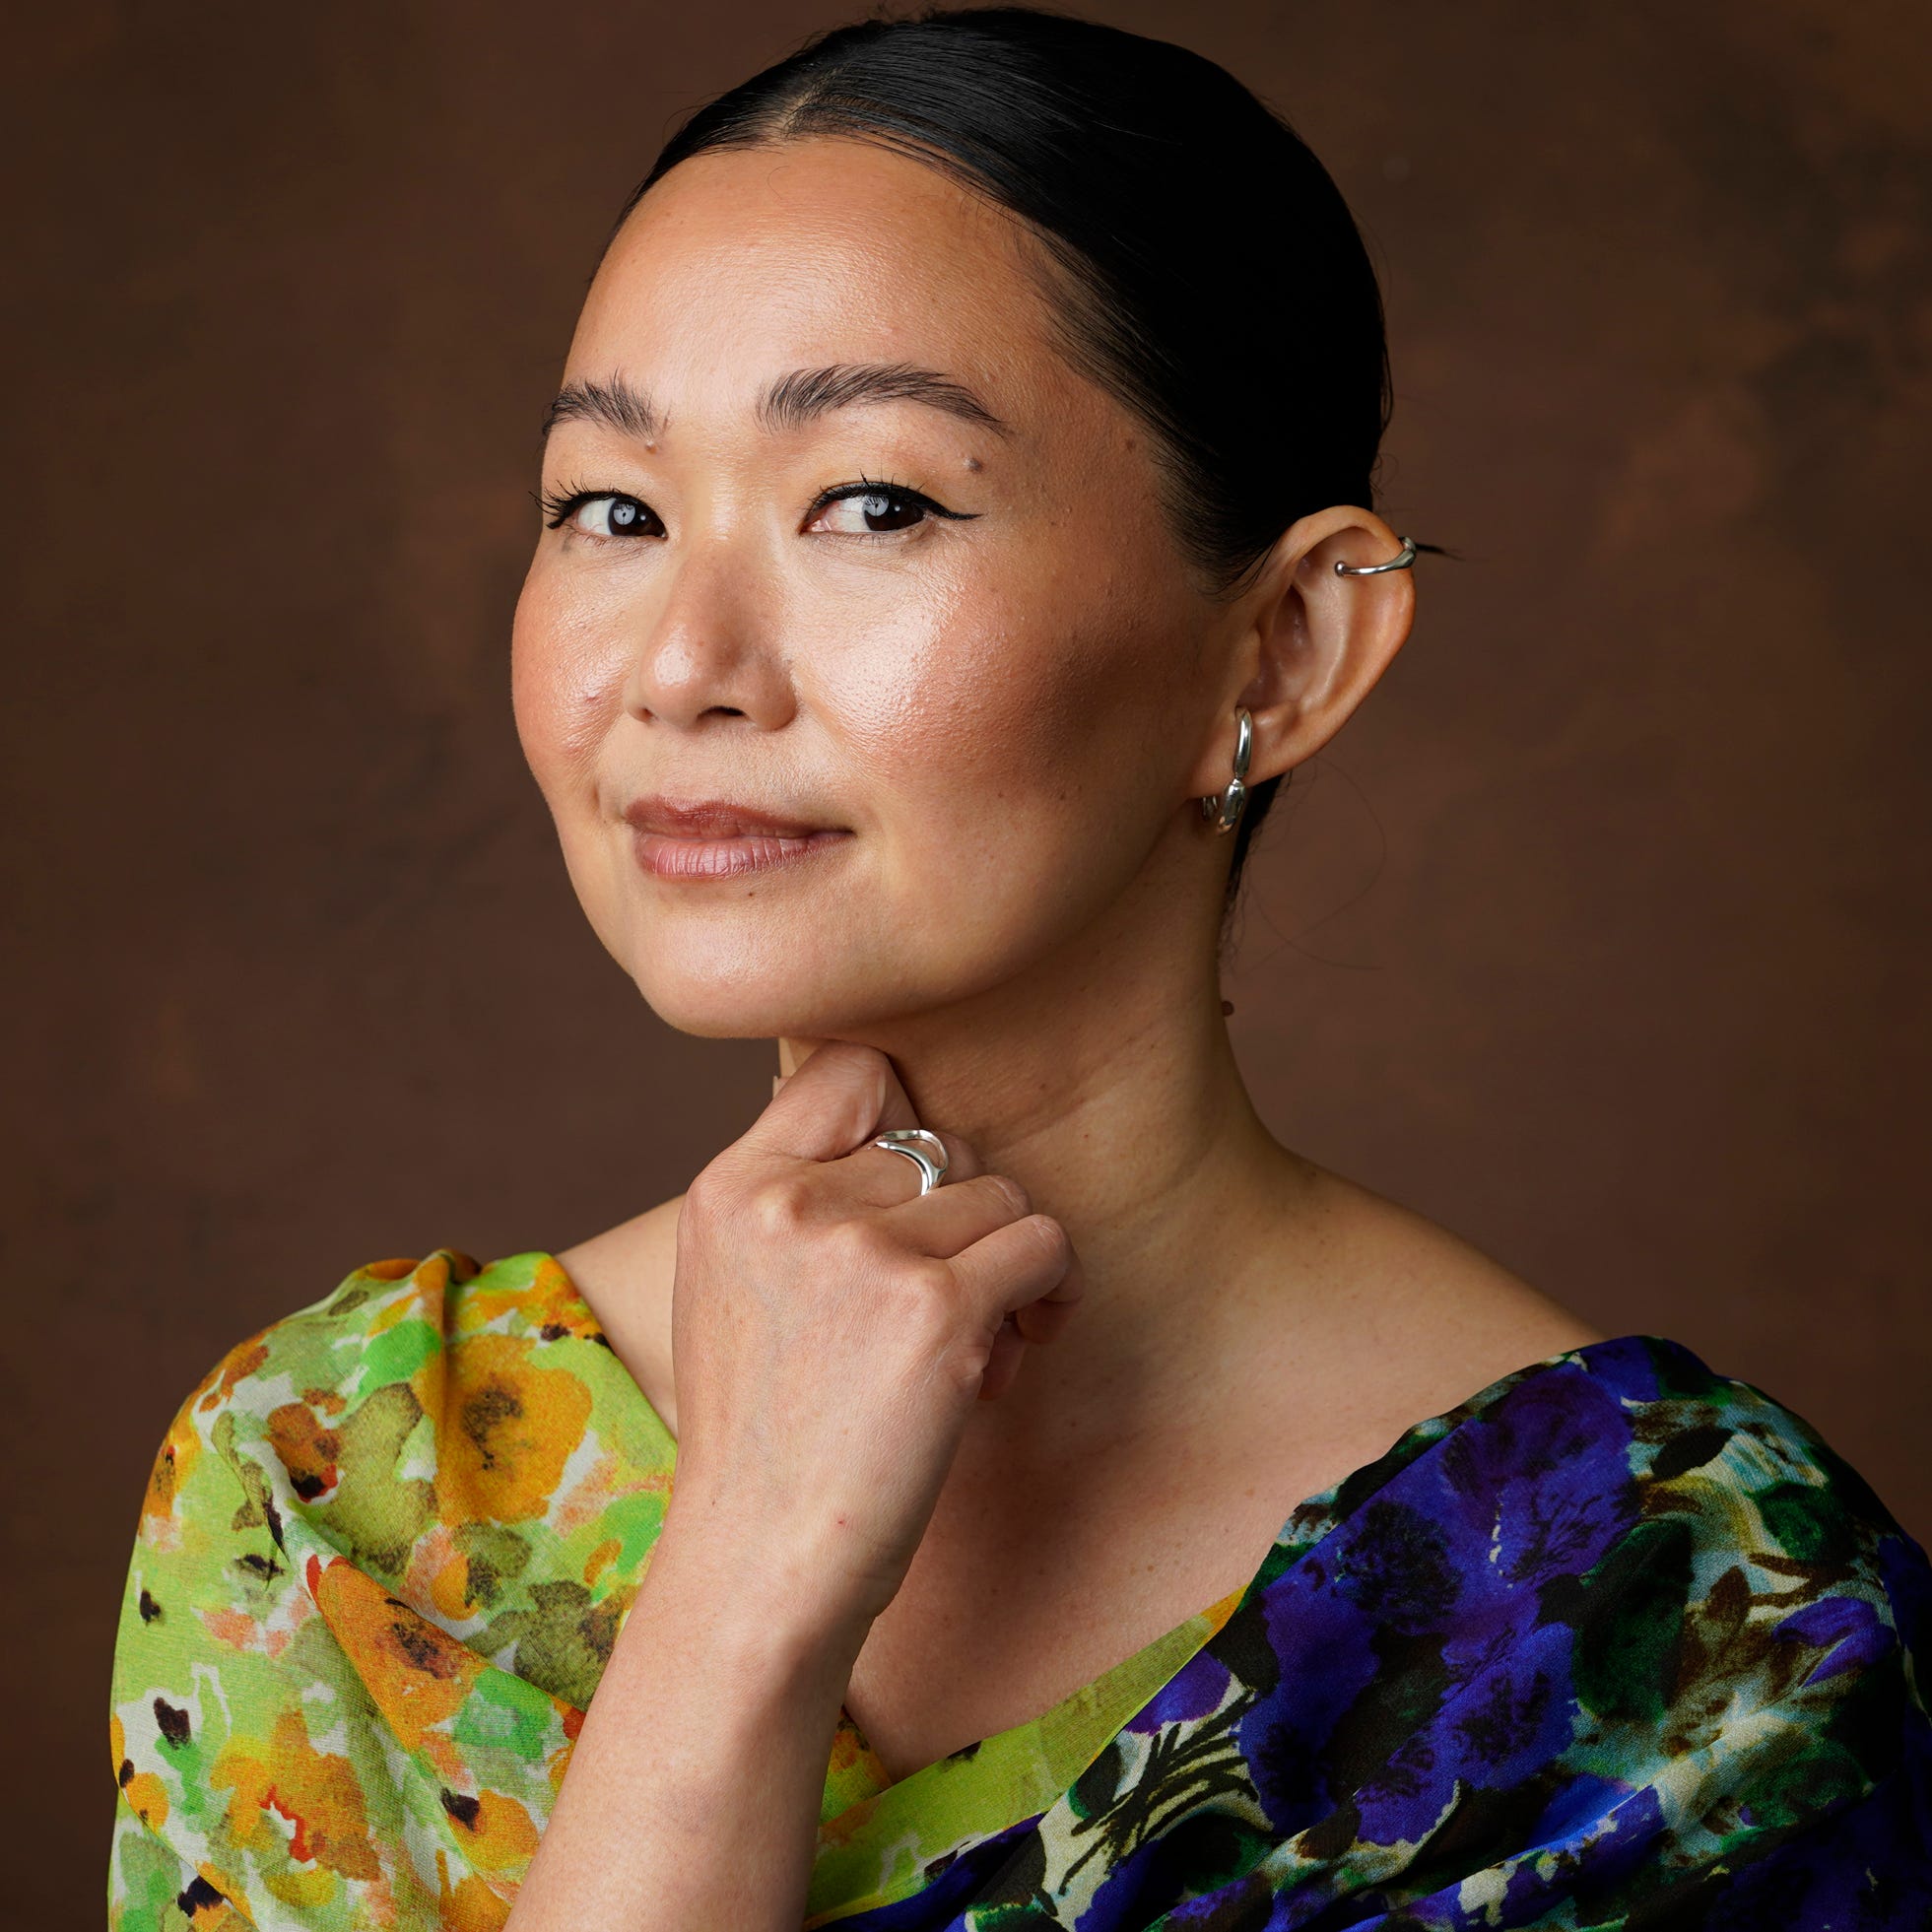 Hong Chau poses for a portrait at the 95th Academy Awards Nominees Luncheon at the Beverly Hilton Hotel in Beverly Hills, Calif., on Feb. 13, 2023. Chau is nominated for an Oscar for best supporting actress for her role in "The Whale." (AP Photo/Chris Pizzello) ORG XMIT: NYET727